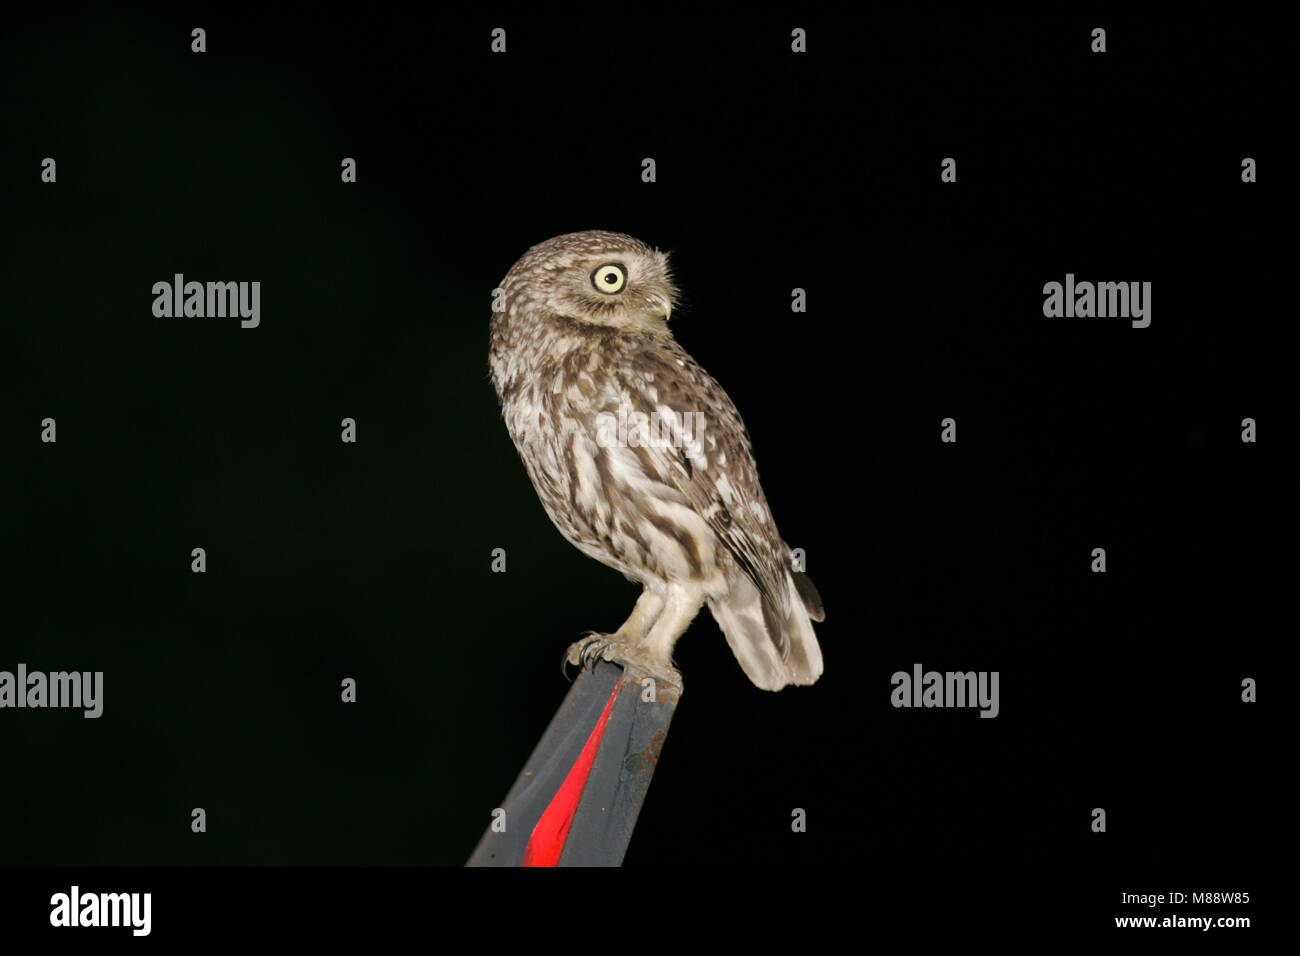 Steenuil zittend bij nacht; Little Owl perched during night Stock Photo